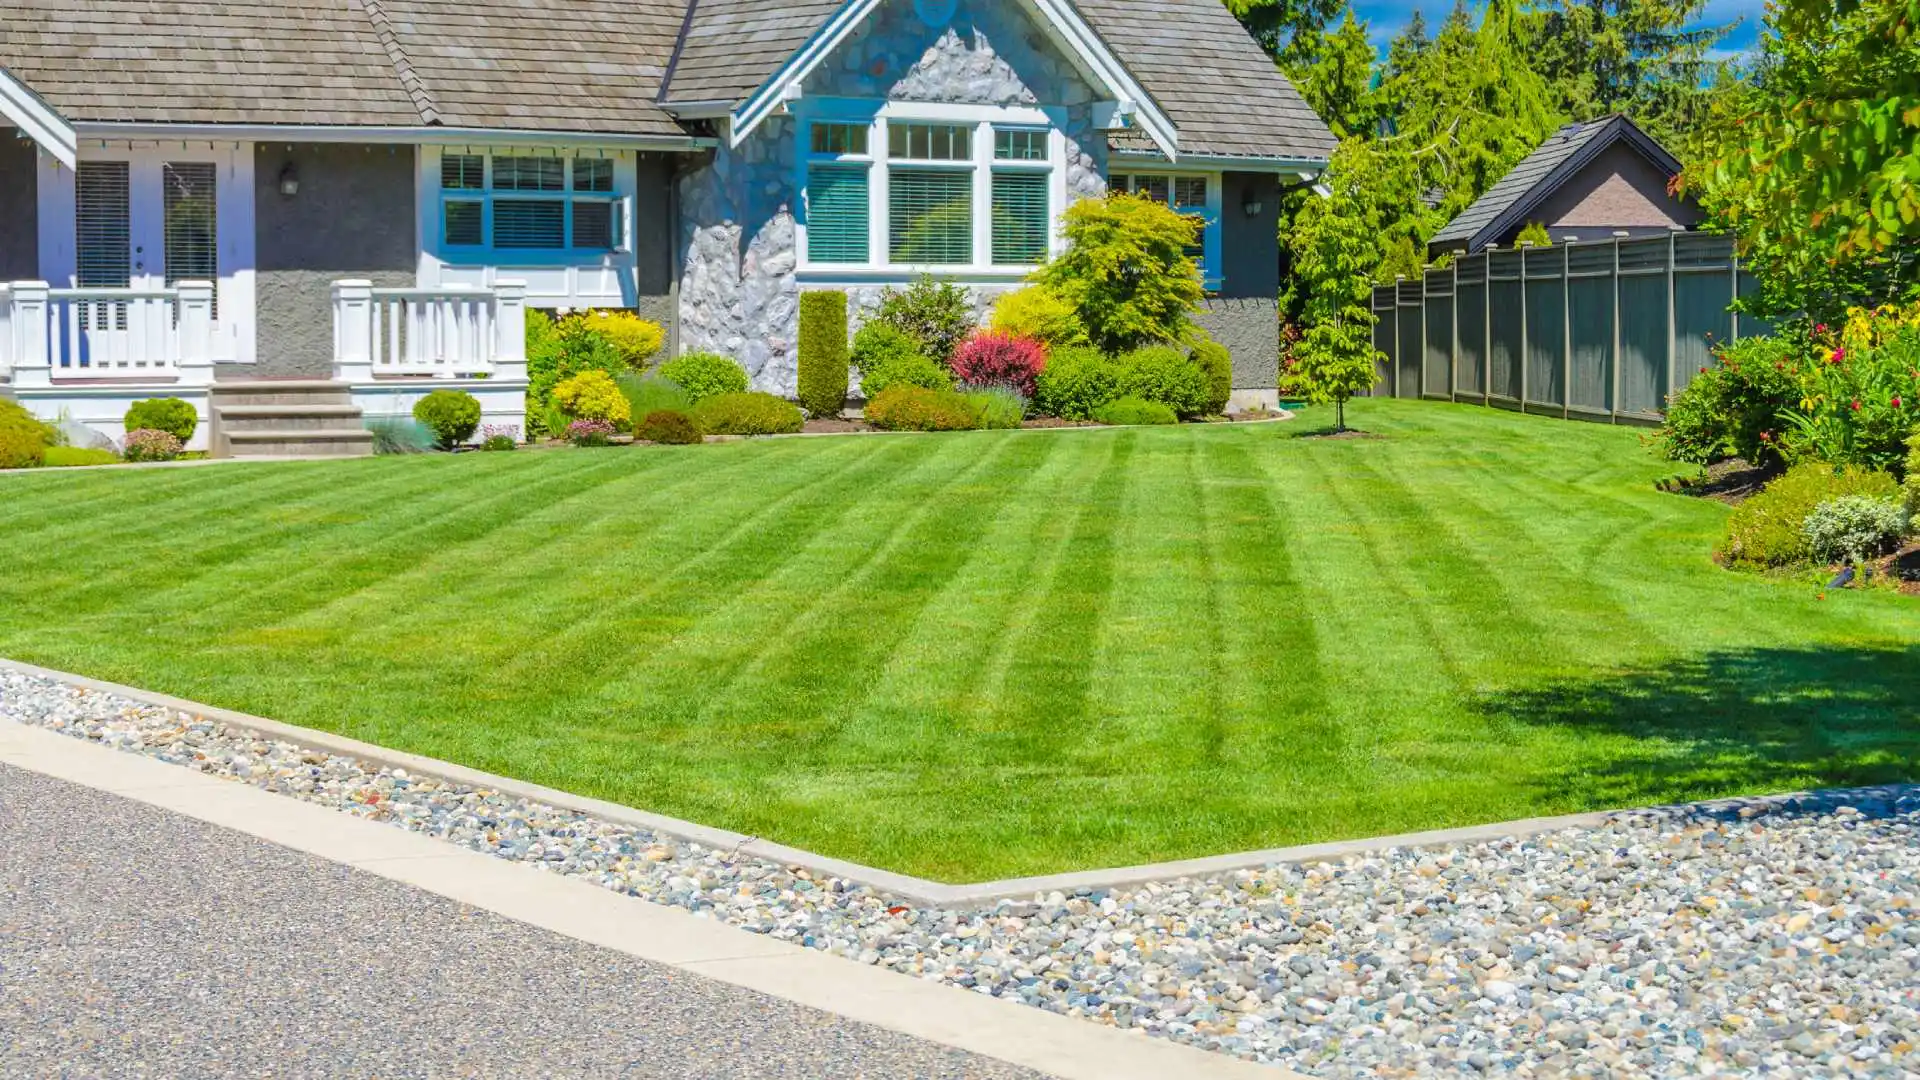 Your Lawn's First Mow of the Season - Don't Forget This Important Step